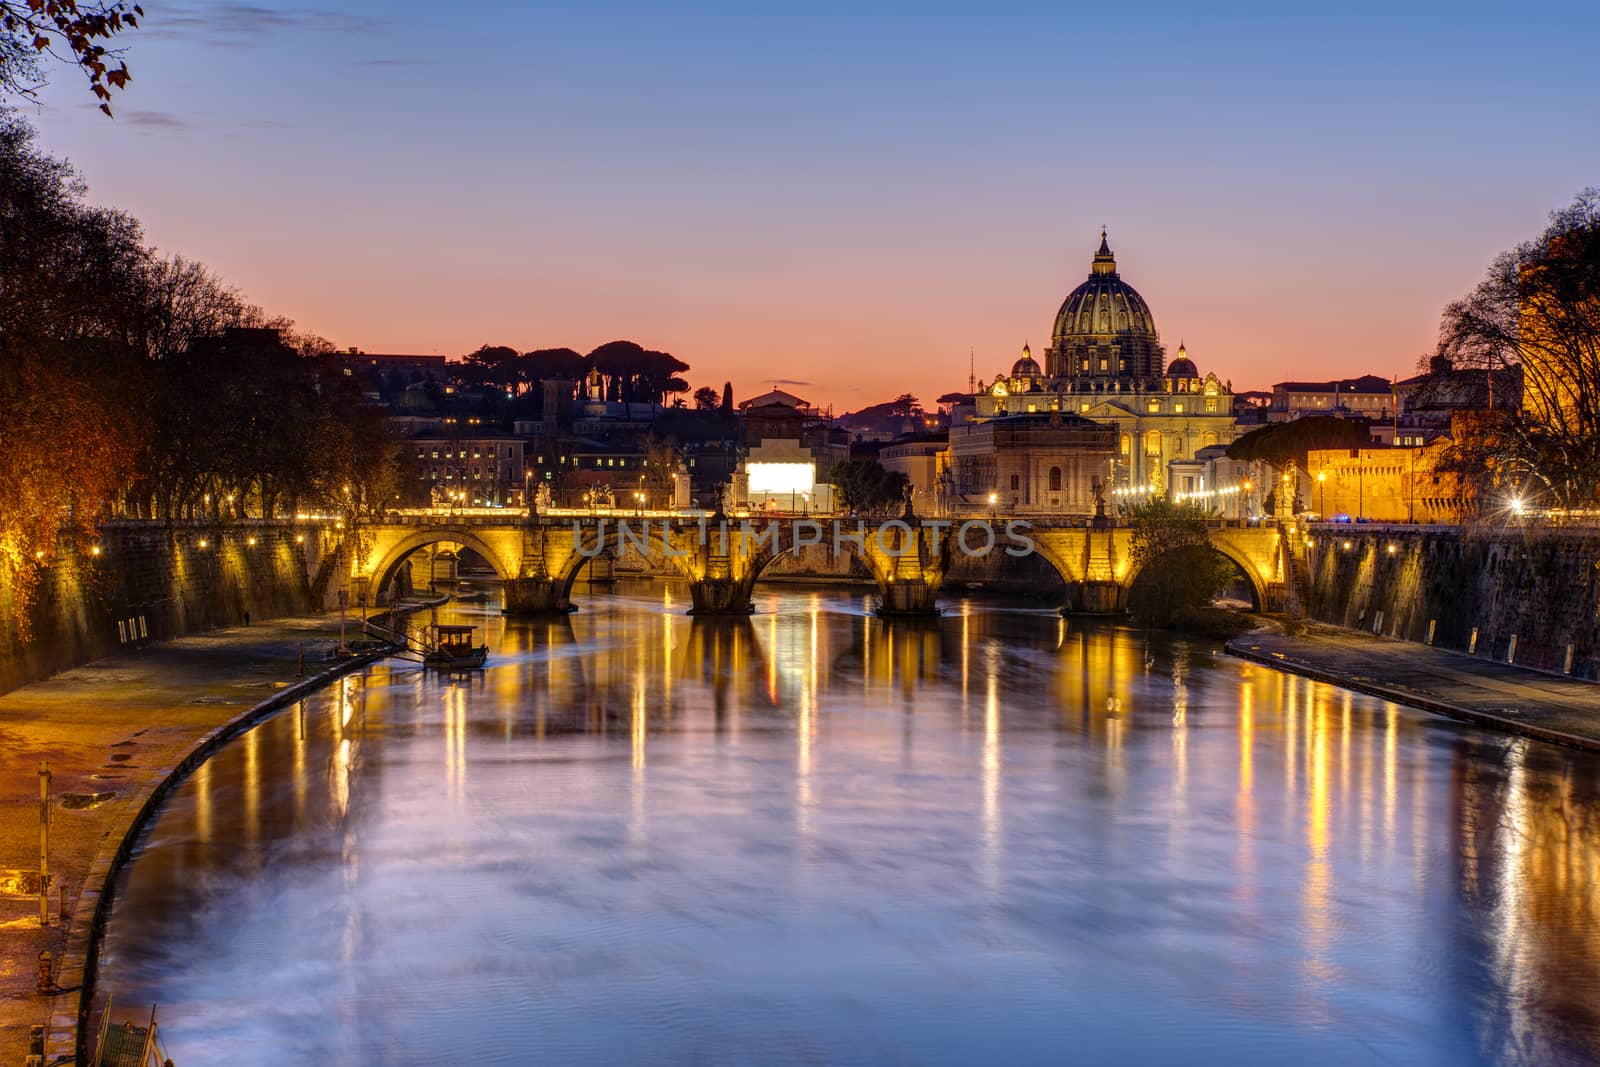 Sunset over the St. Peters Basilica by elxeneize